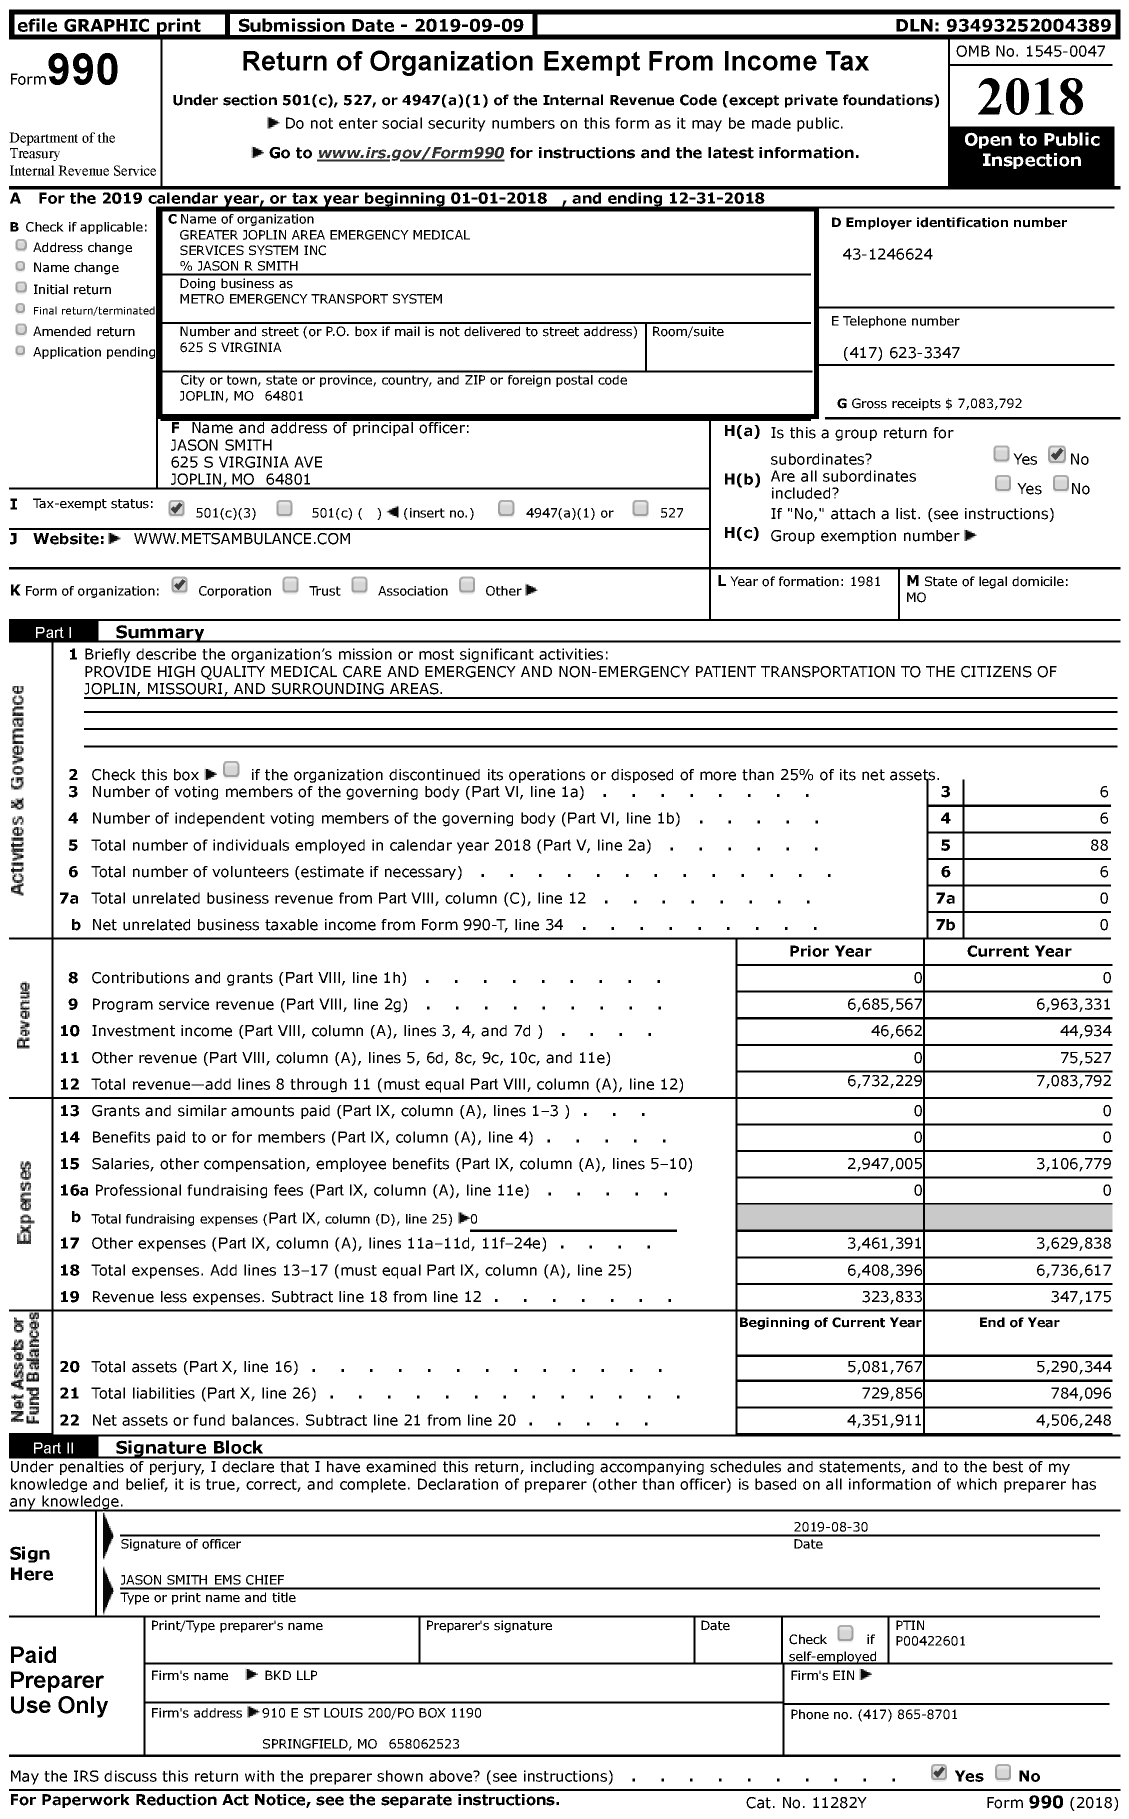 Image of first page of 2018 Form 990 for Metro Emergency Transport System (METS)